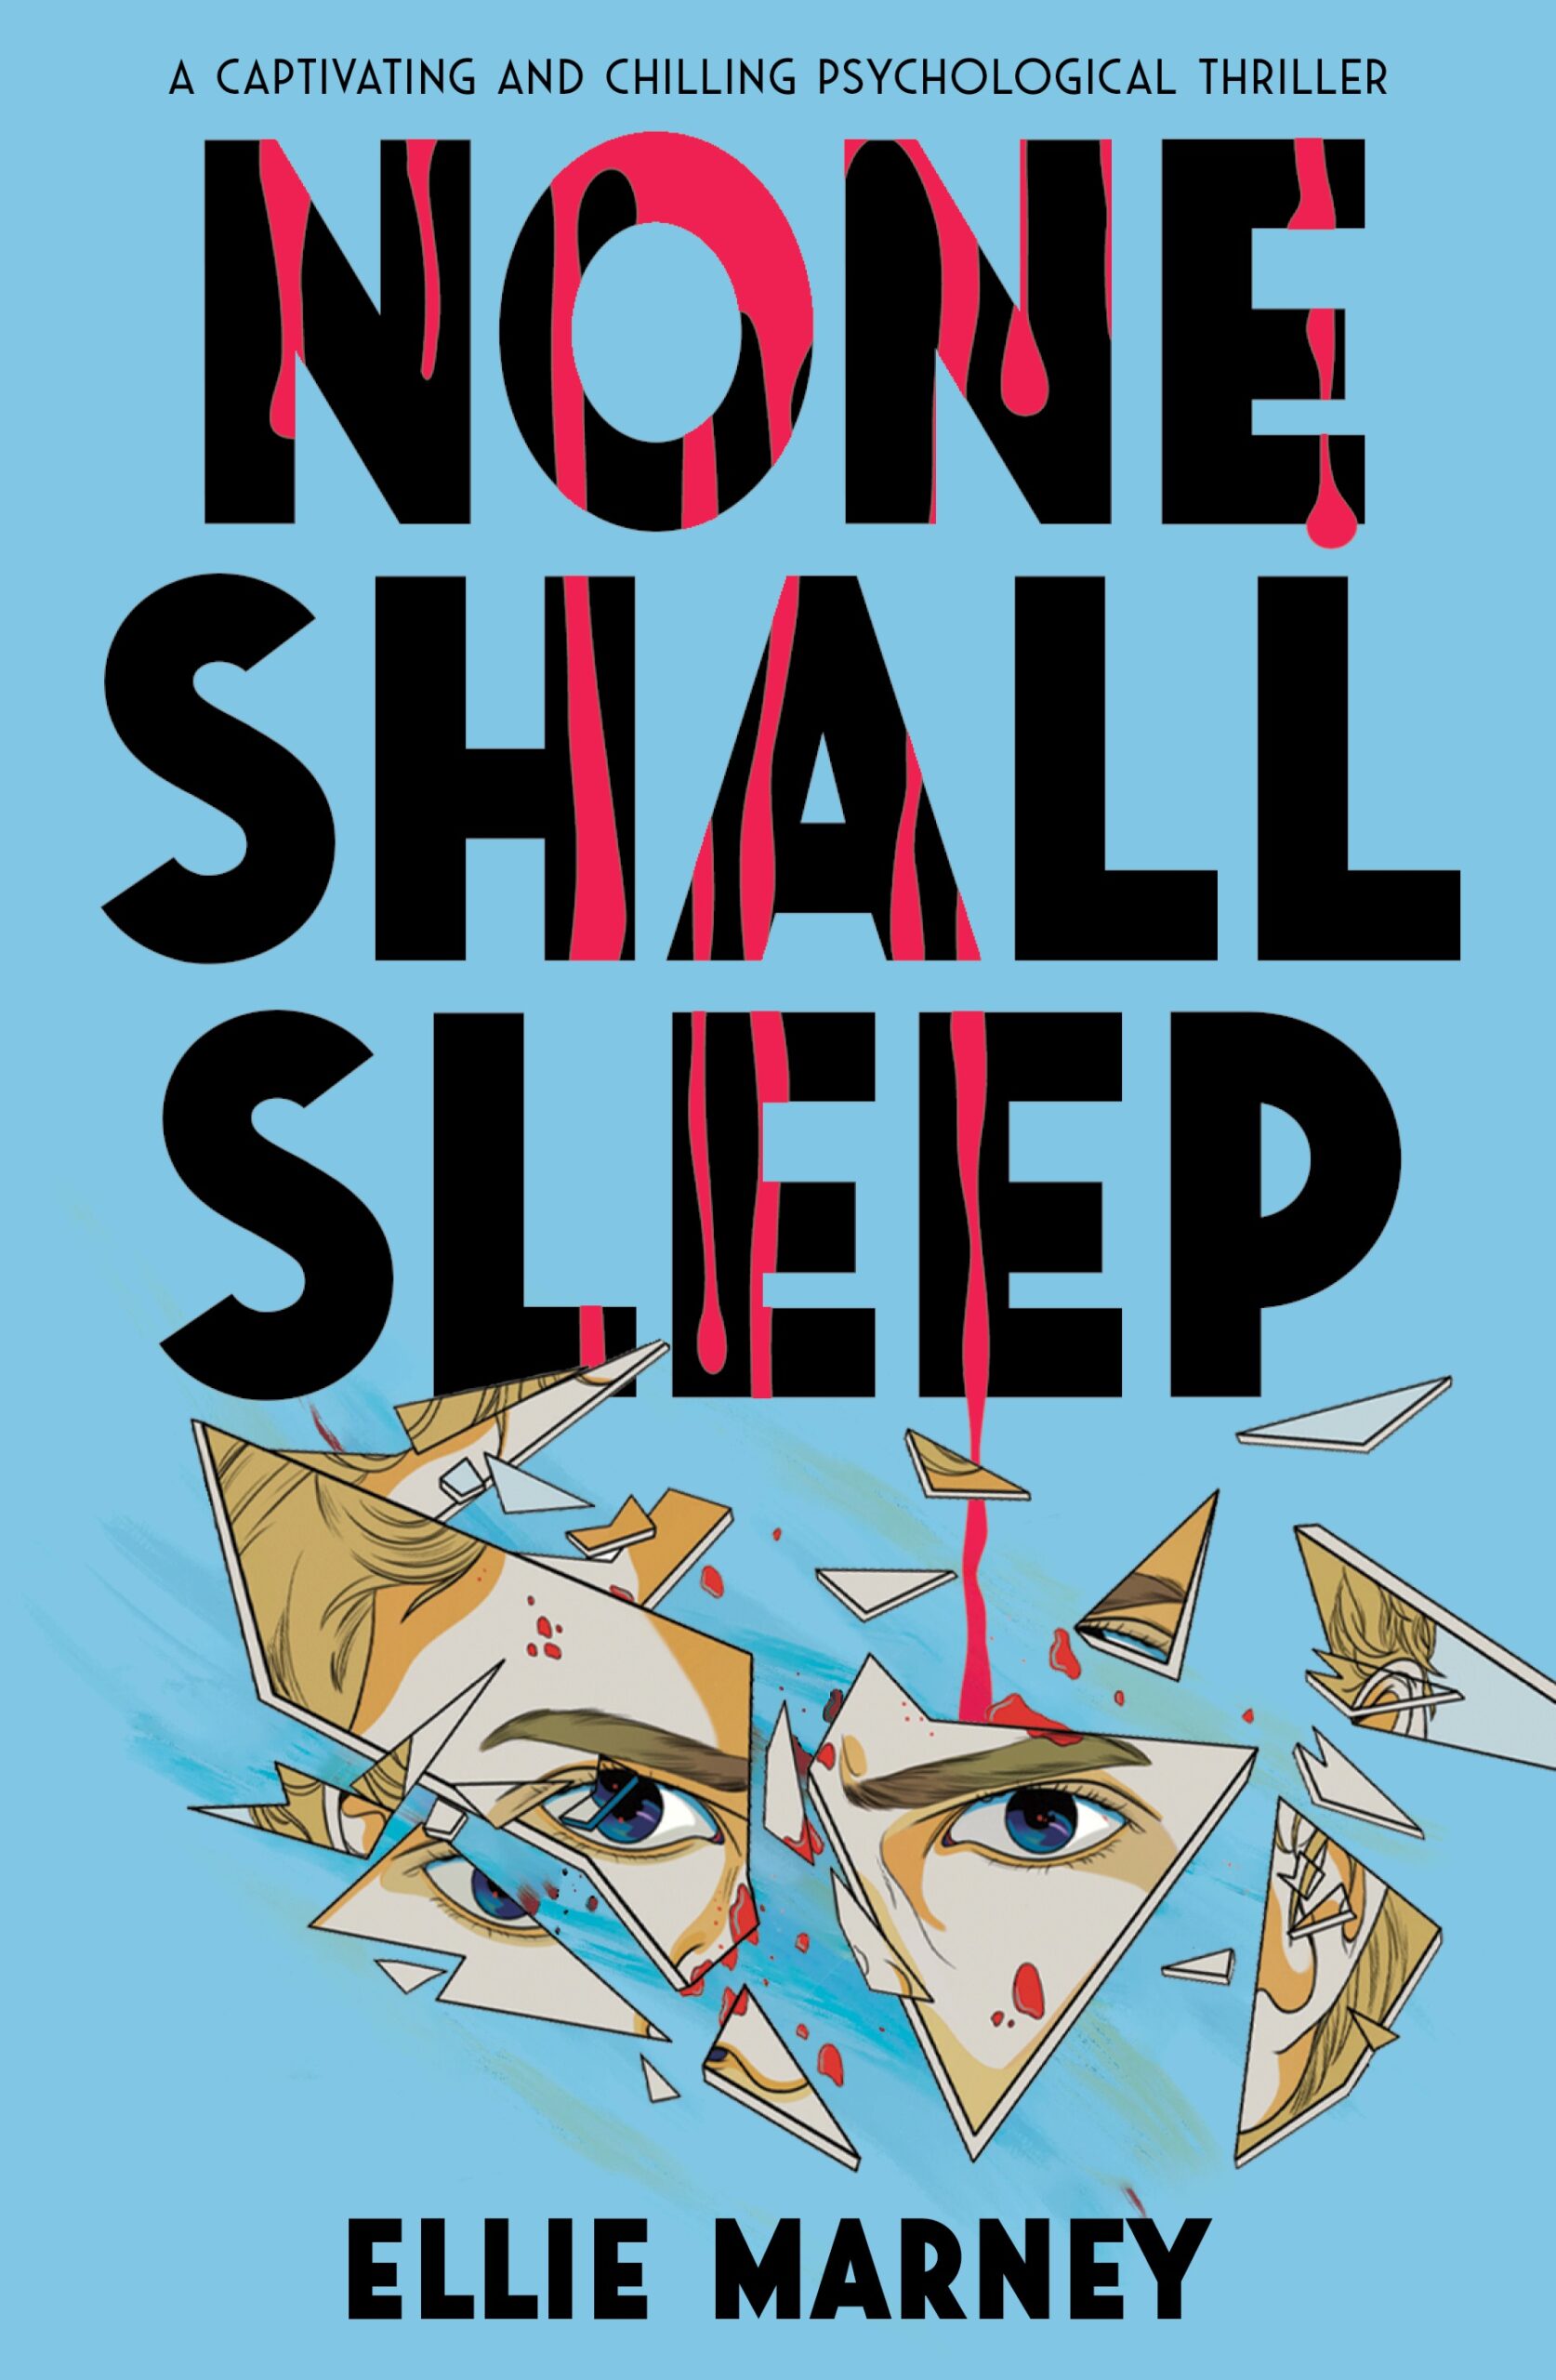 none shall sleep book review